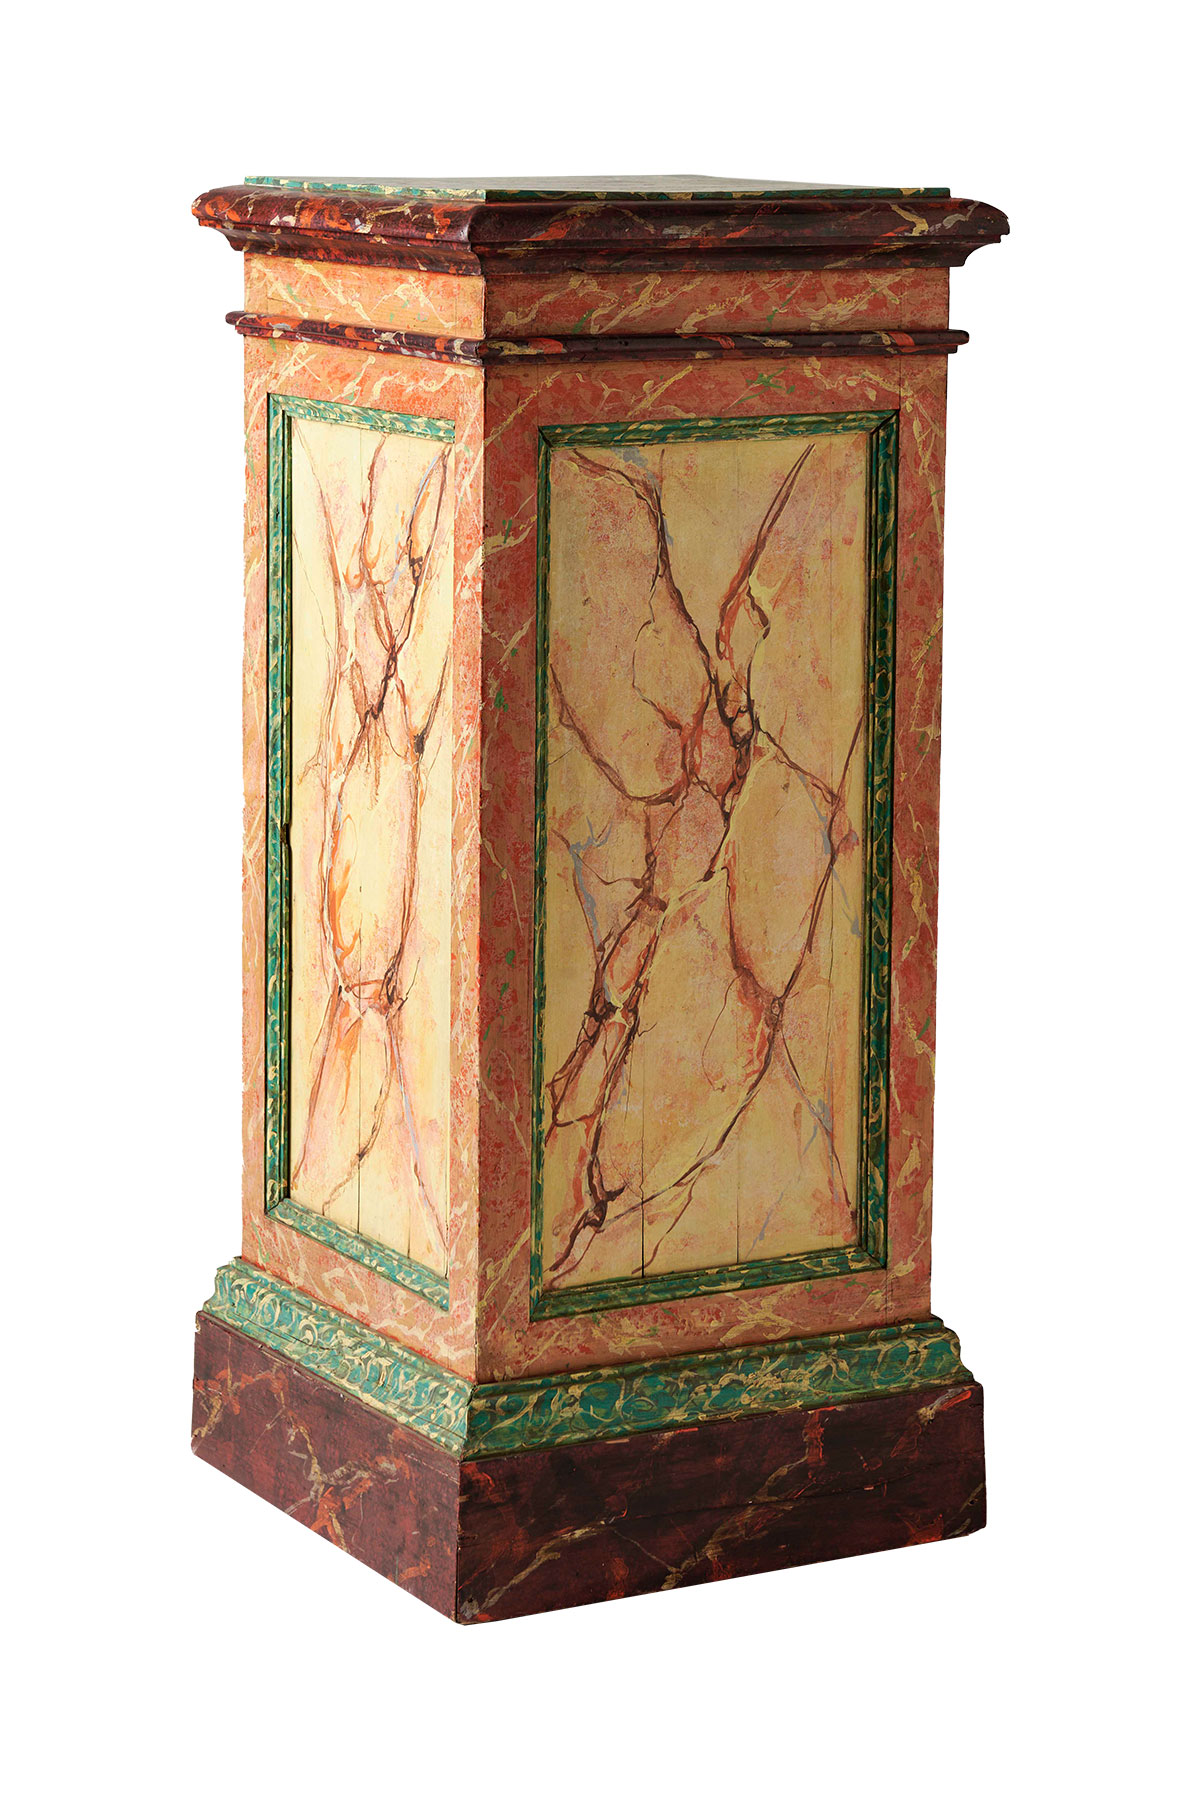 Vintage Faux Marble Pedestal from Coco & Dash